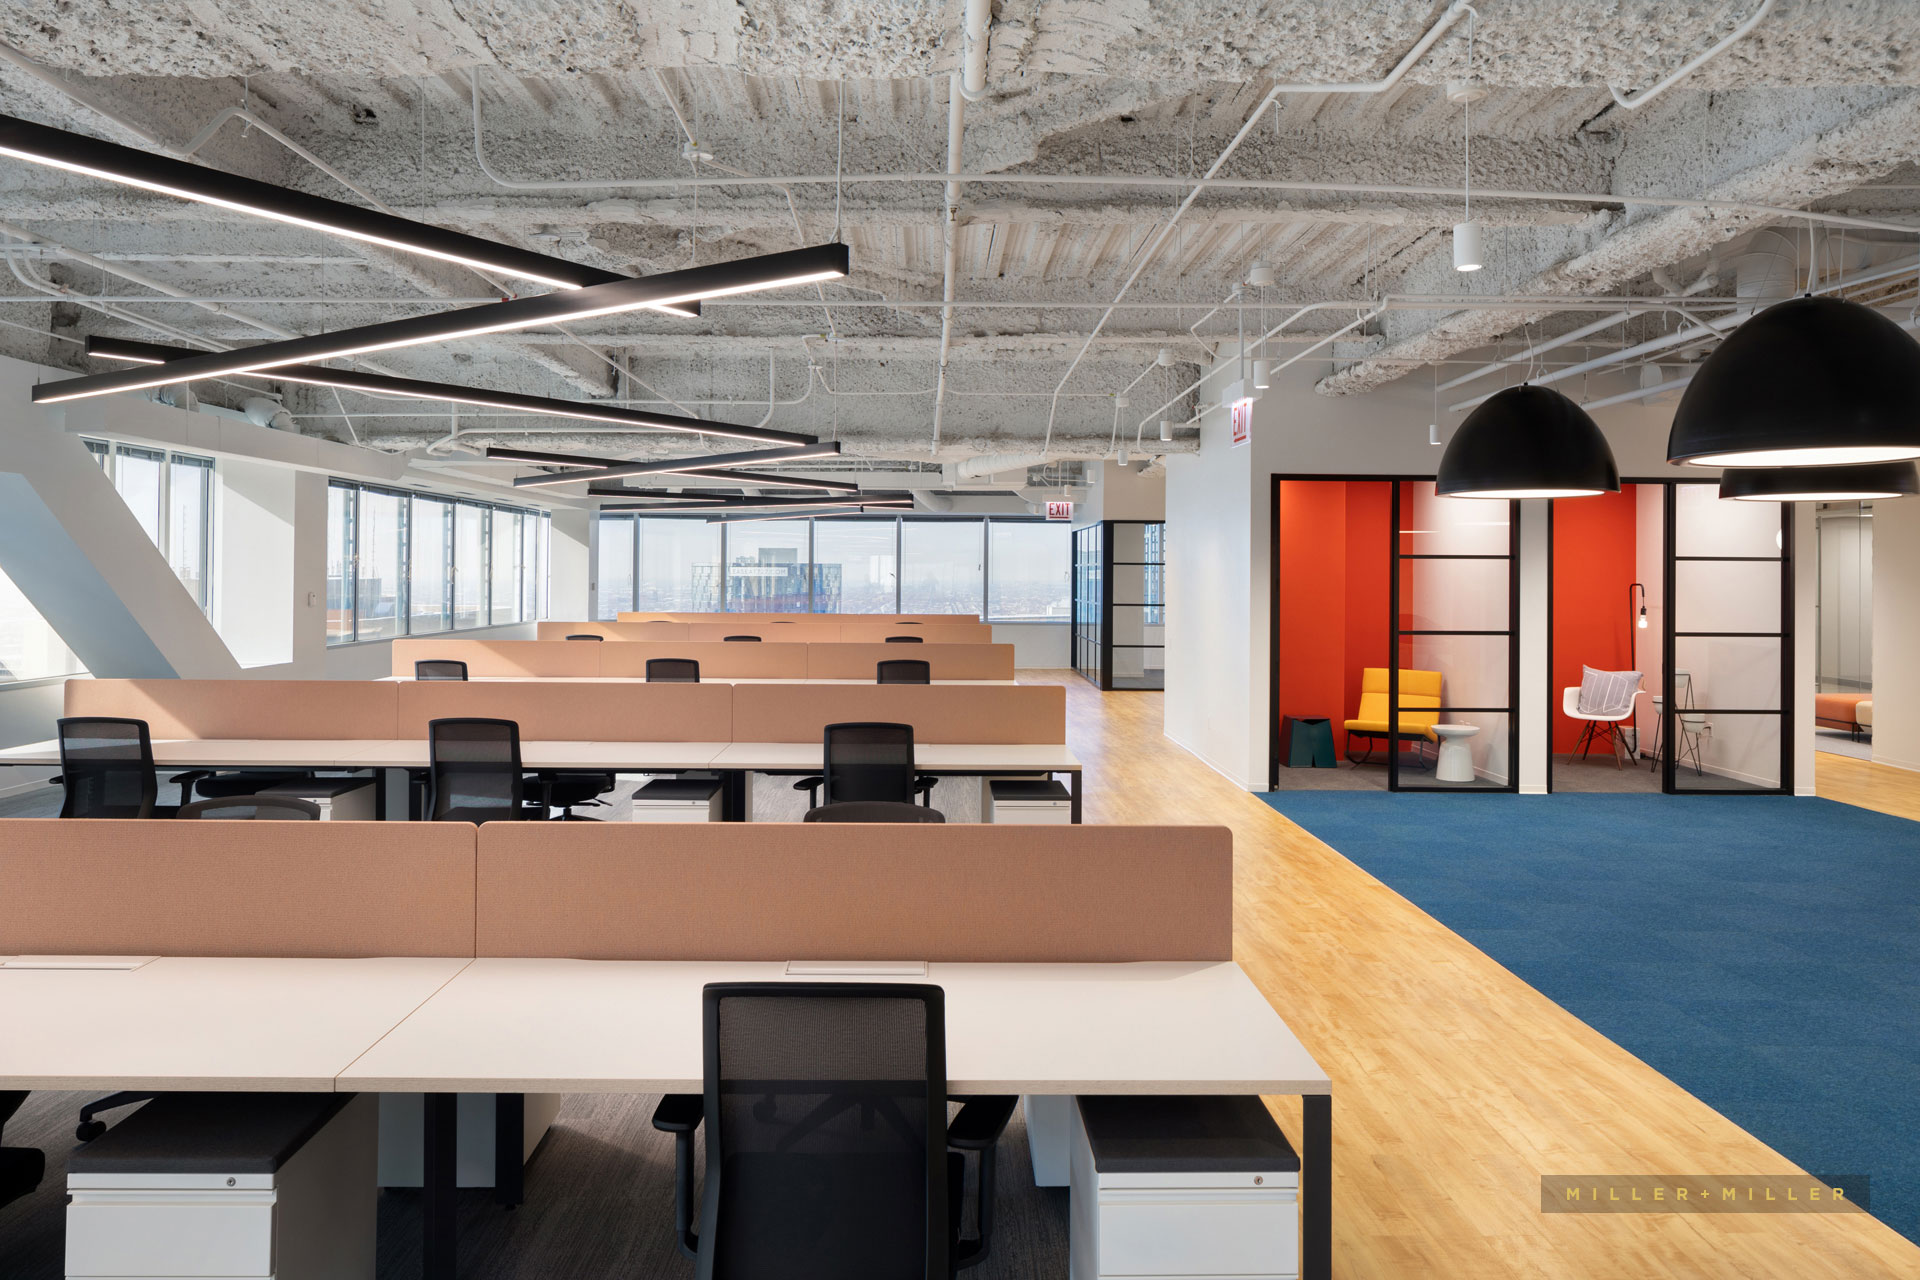 Indianapolis Corporate Interiors Images Archives - Chicago ...